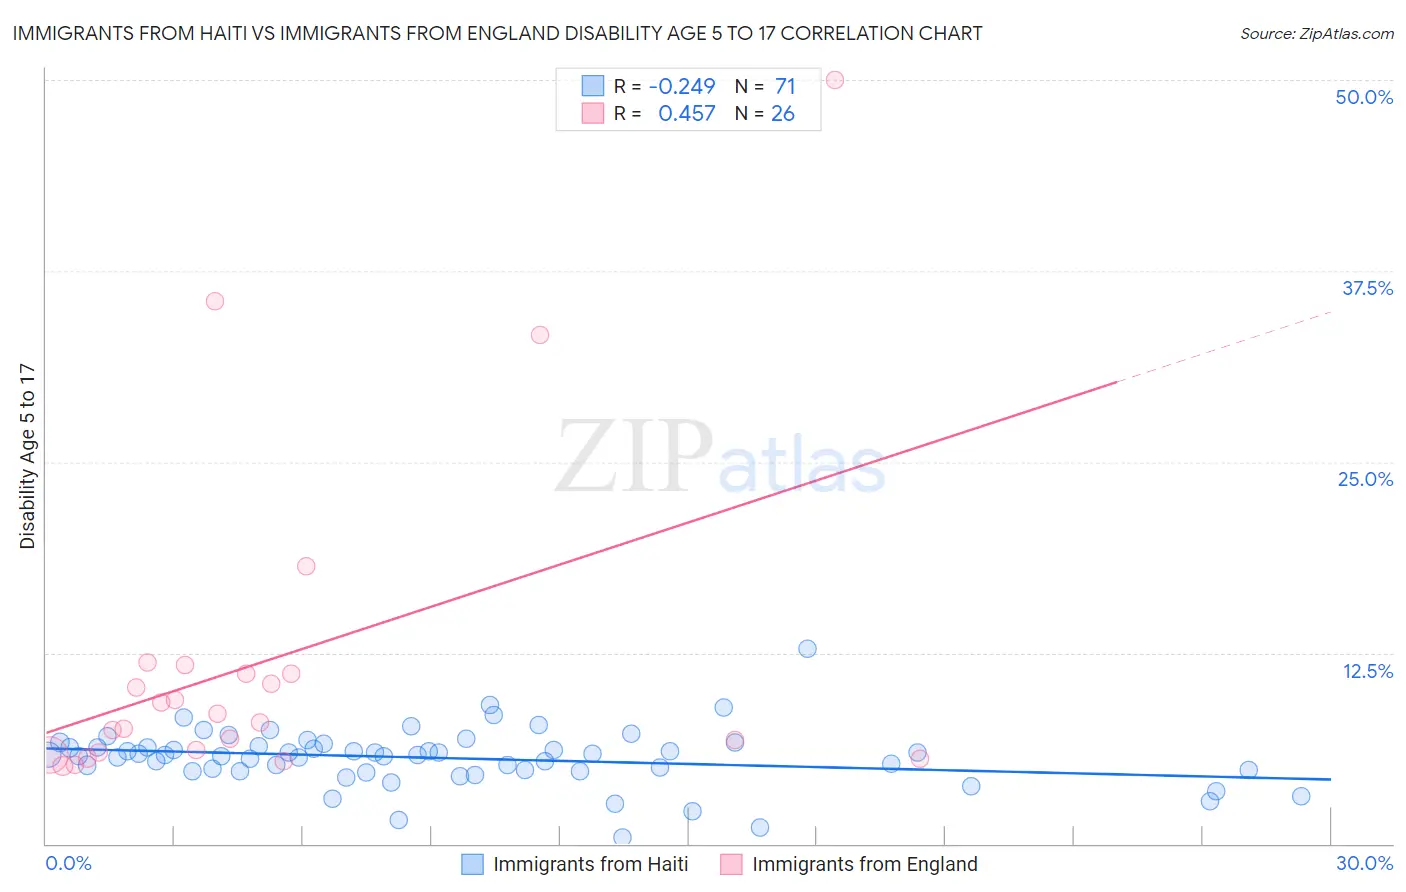 Immigrants from Haiti vs Immigrants from England Disability Age 5 to 17